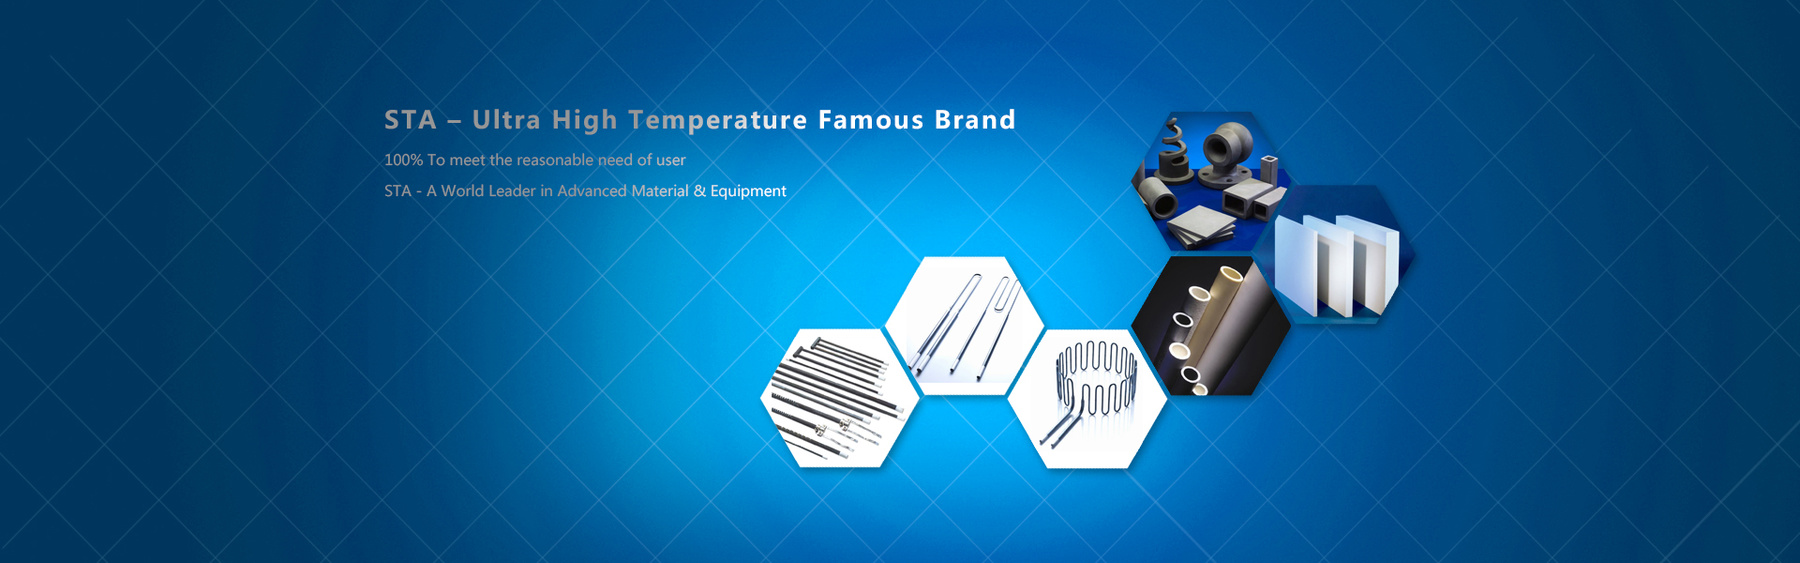 sic heating elements and MoSi2 heating elements banner